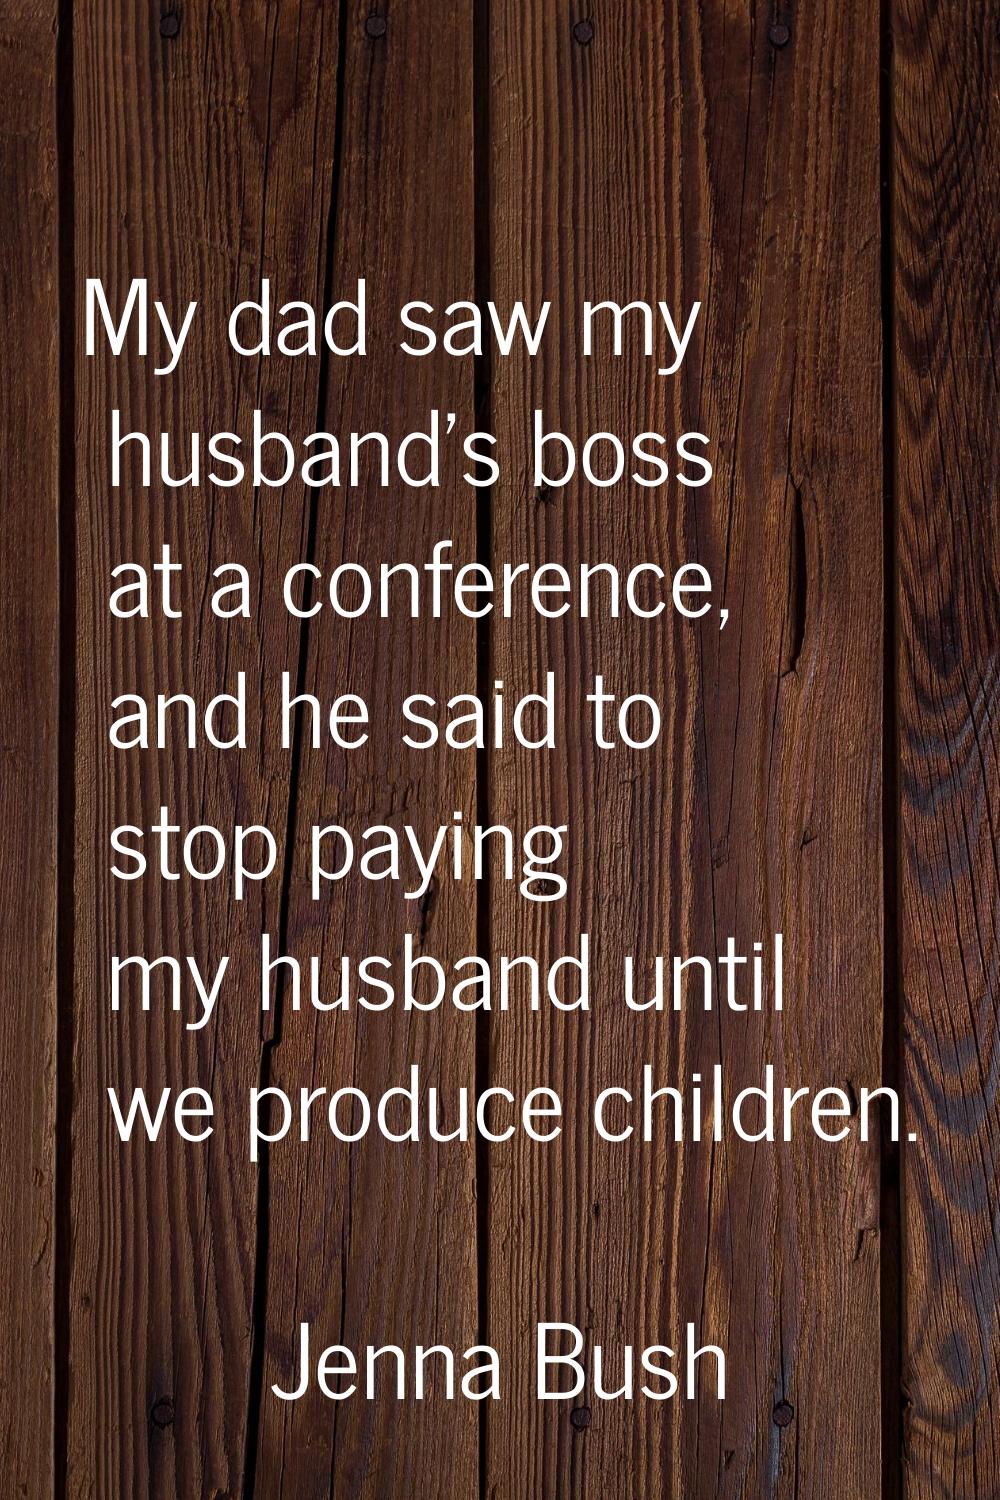 My dad saw my husband's boss at a conference, and he said to stop paying my husband until we produc